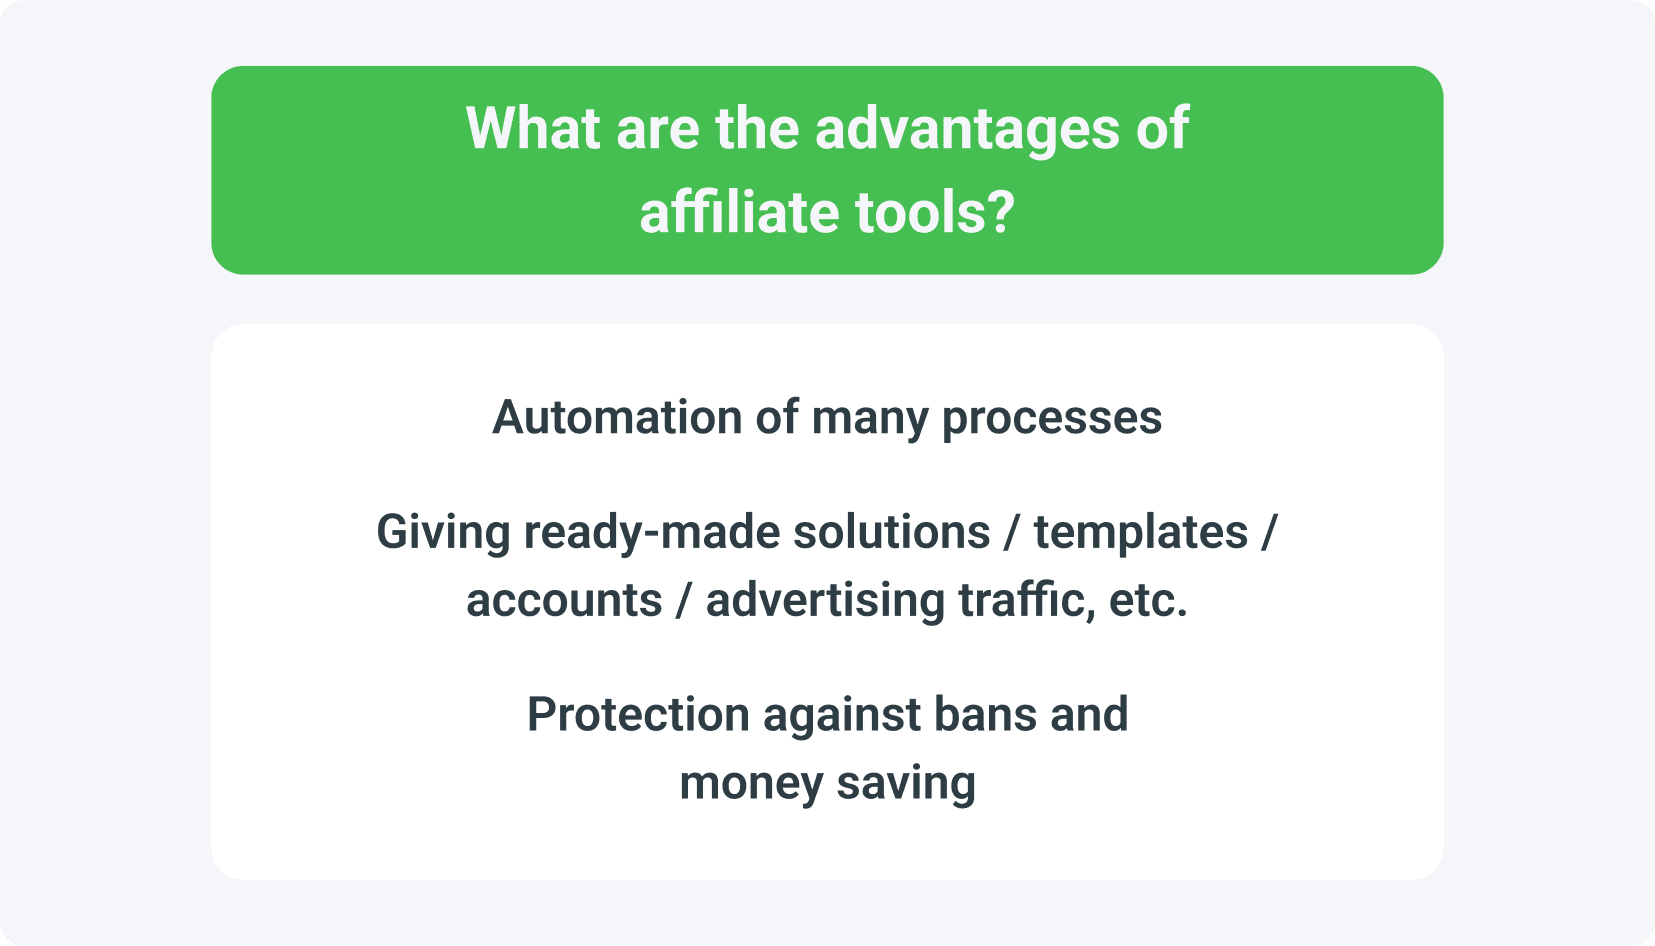 The benefits of affiliate tools are automation, ready solutions, and protection